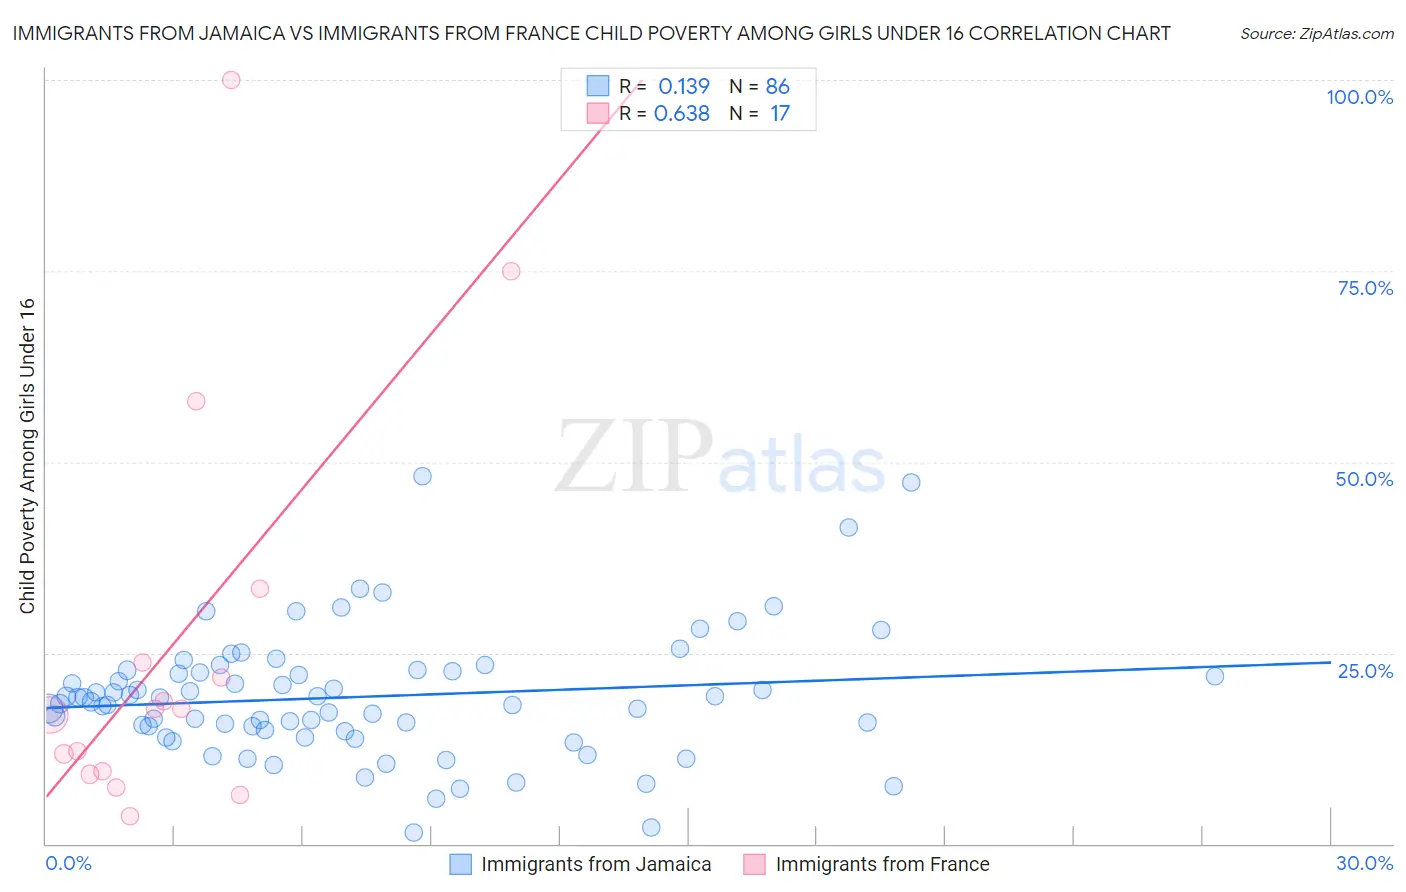 Immigrants from Jamaica vs Immigrants from France Child Poverty Among Girls Under 16